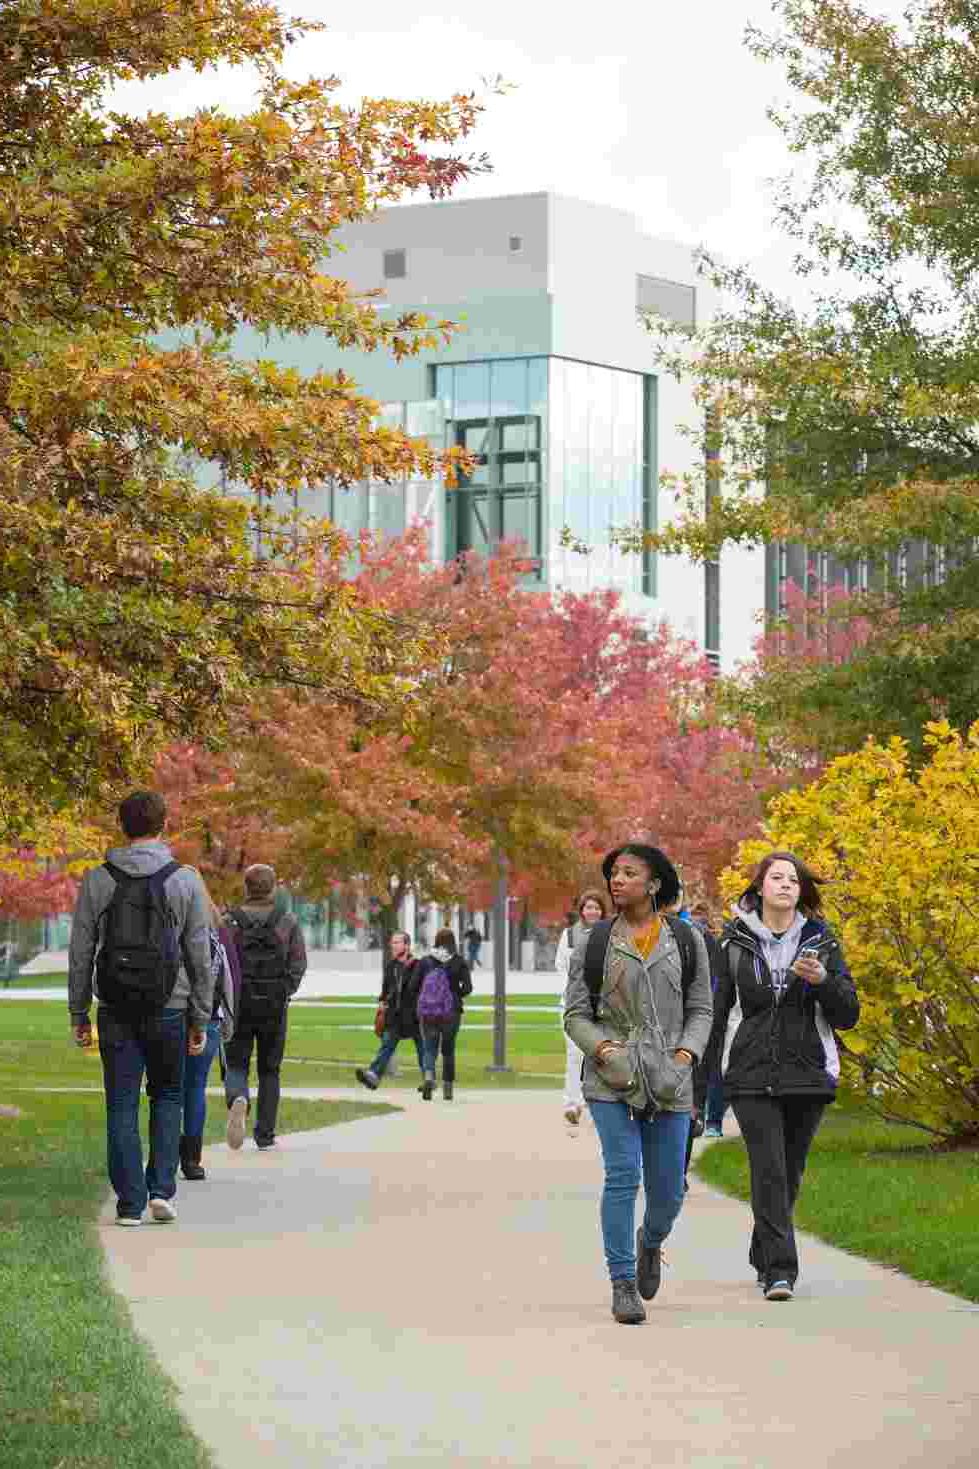 Students walking on Campus in the Fall